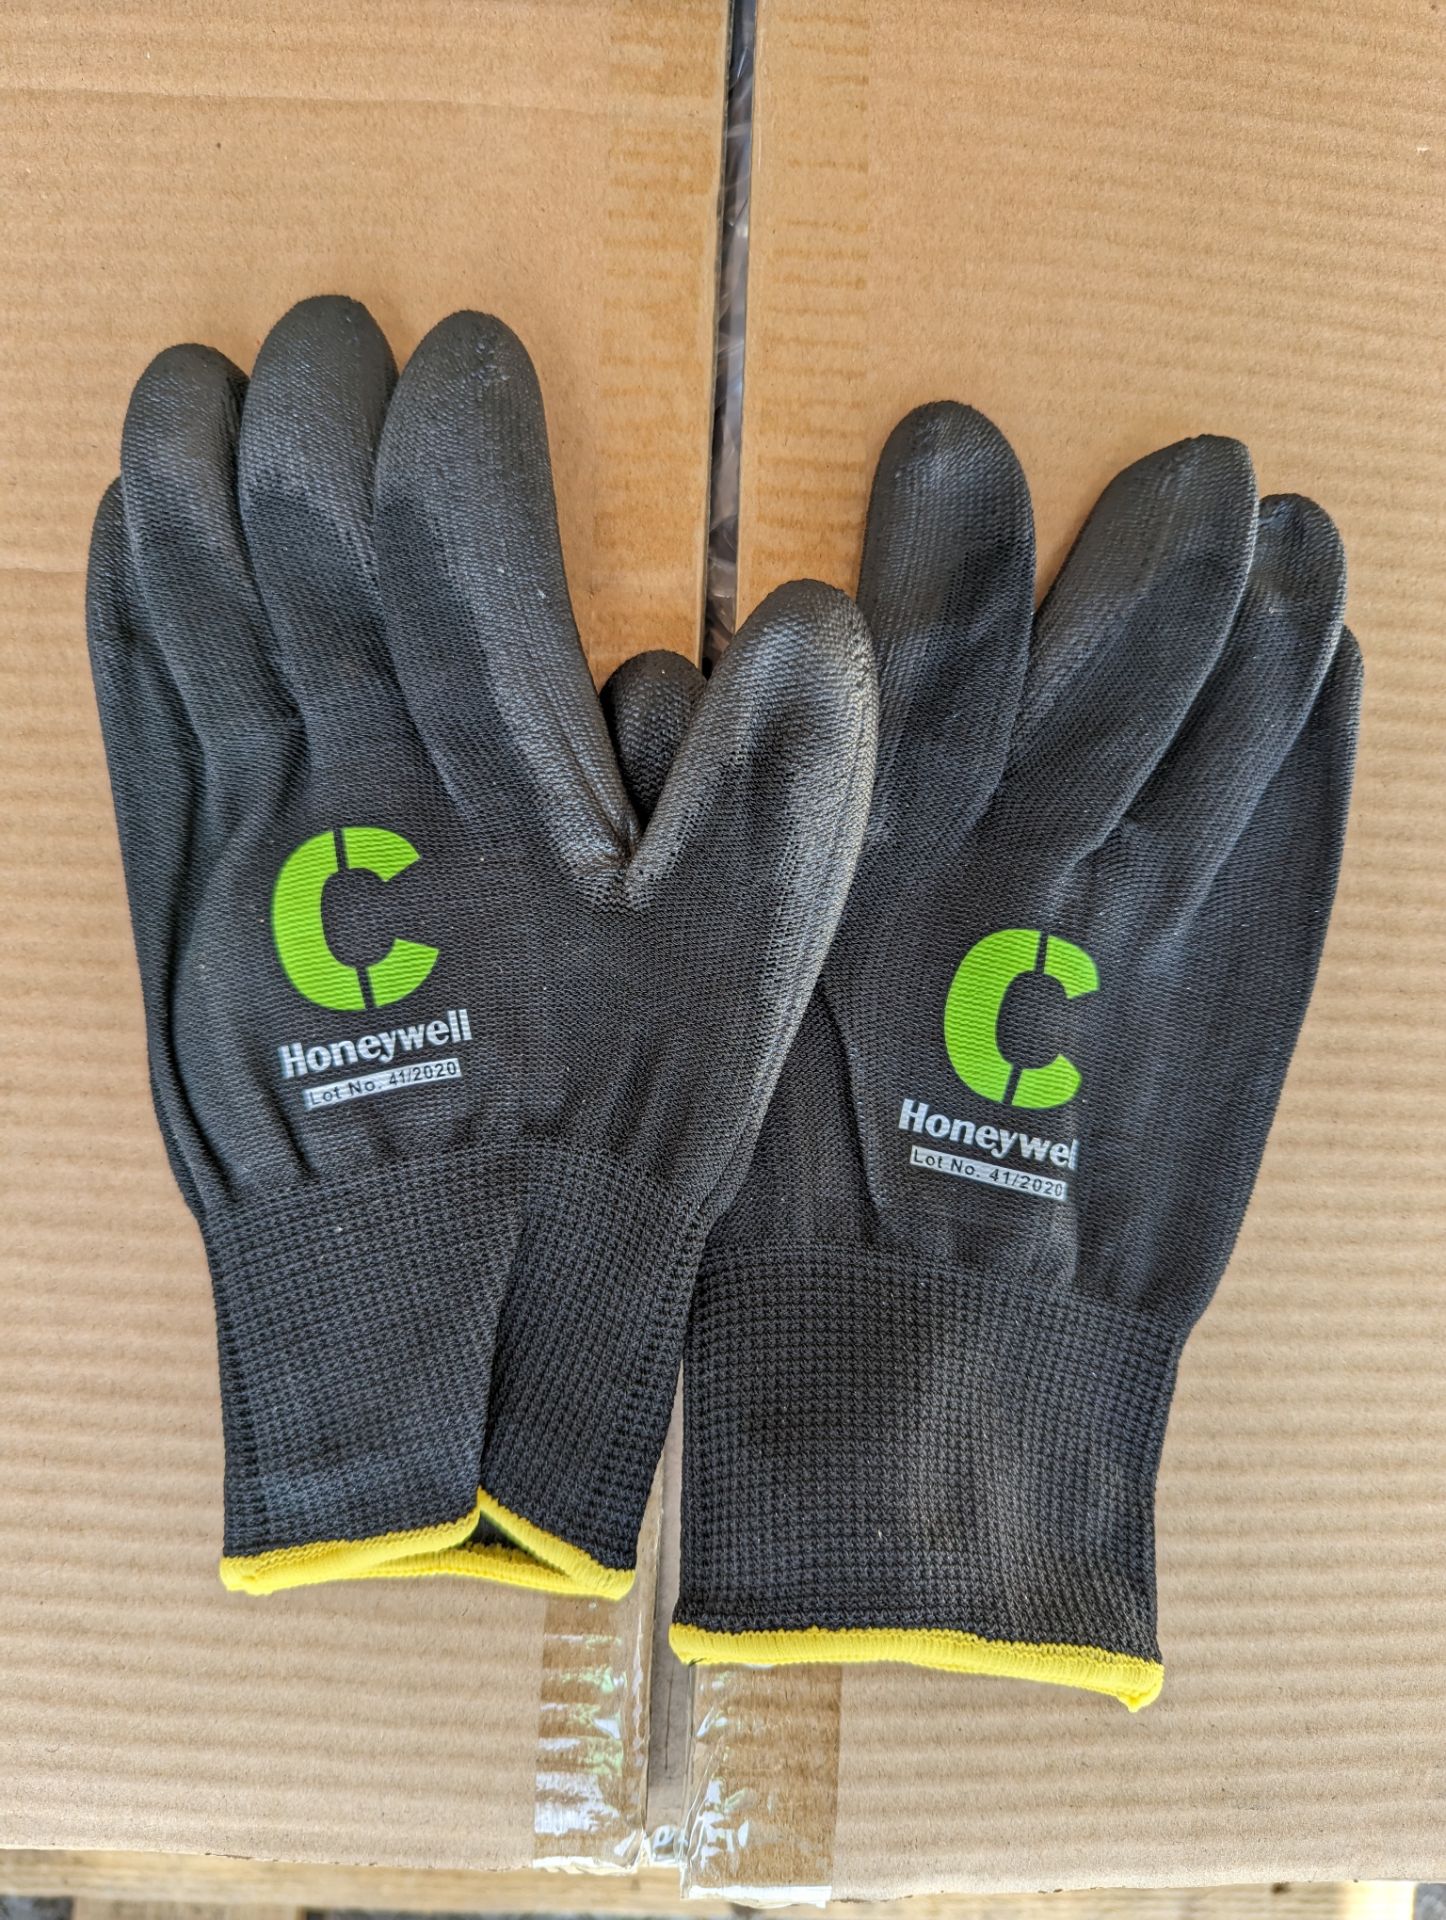 50 Pairs of Cut Resistant Gloves Mixed Sizes - Image 3 of 3